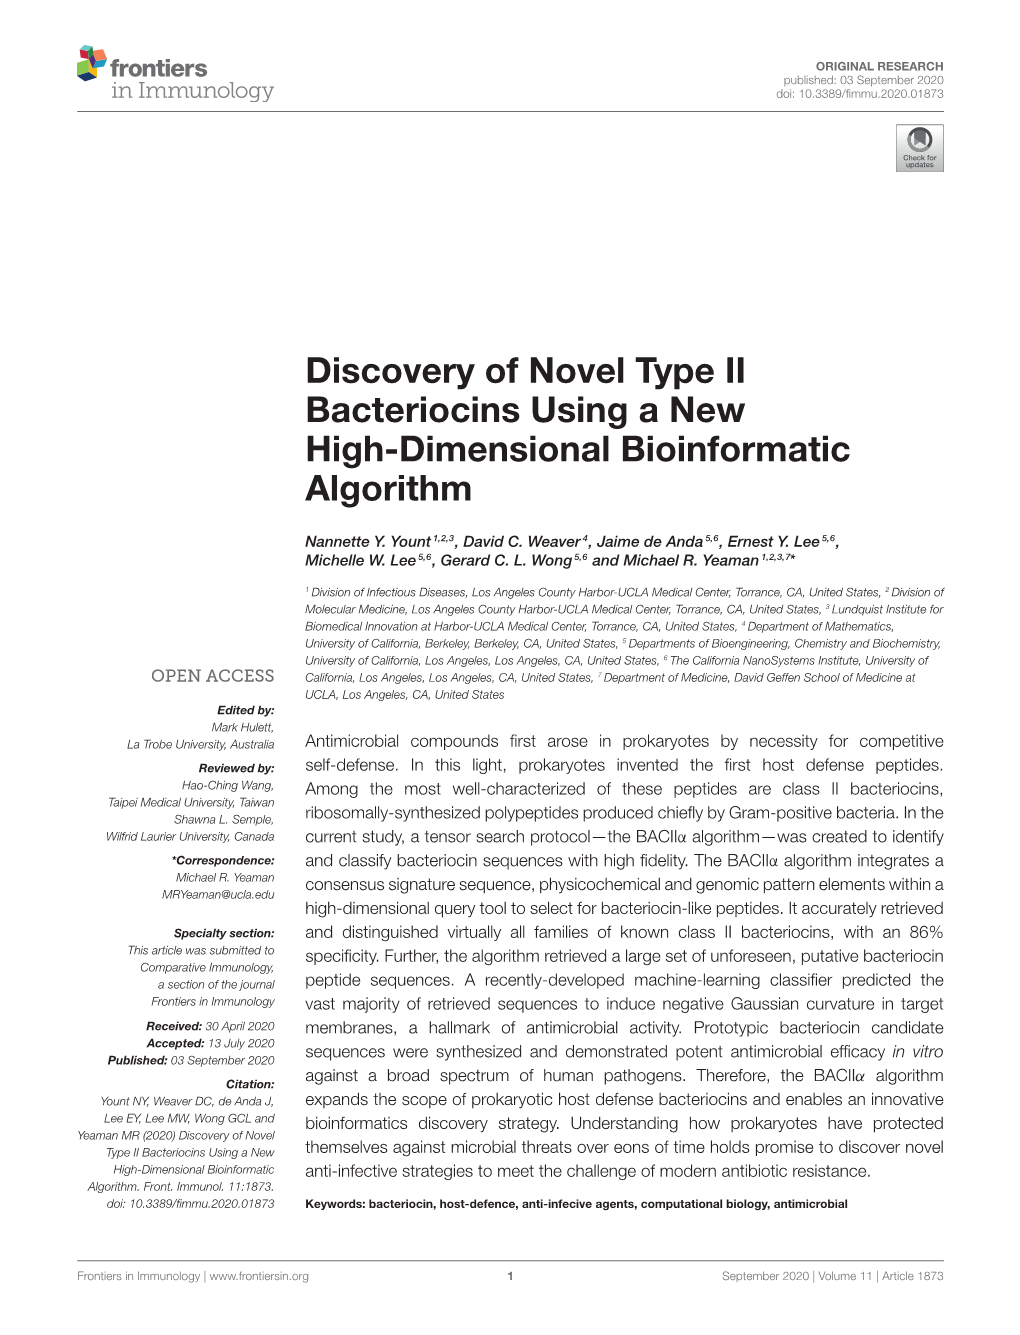 Discovery of Novel Type II Bacteriocins Using a New High-Dimensional Bioinformatic Algorithm